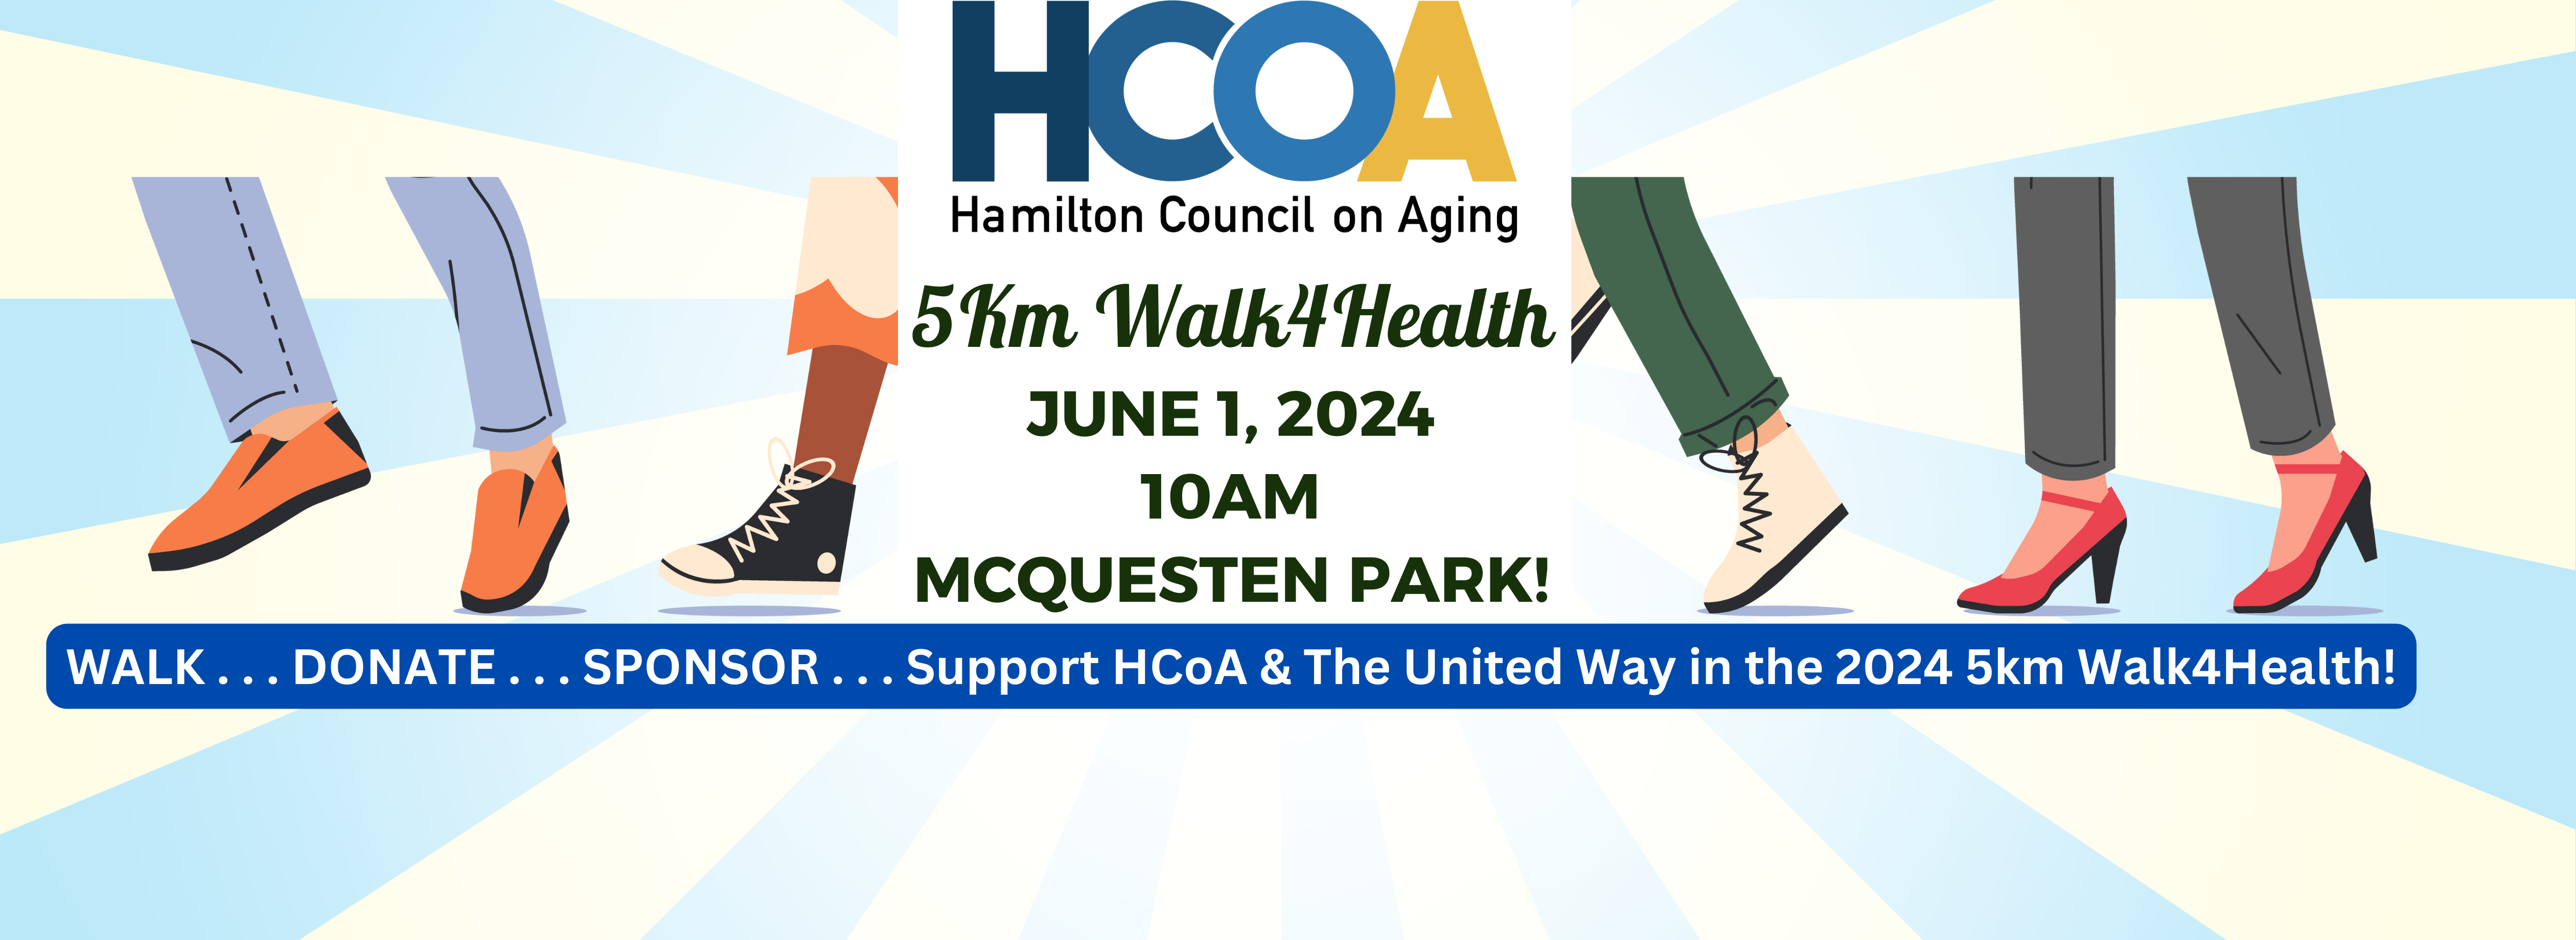 Join us - Sponsor - Donate to HCoA at the 2024 5KM Walk4Health